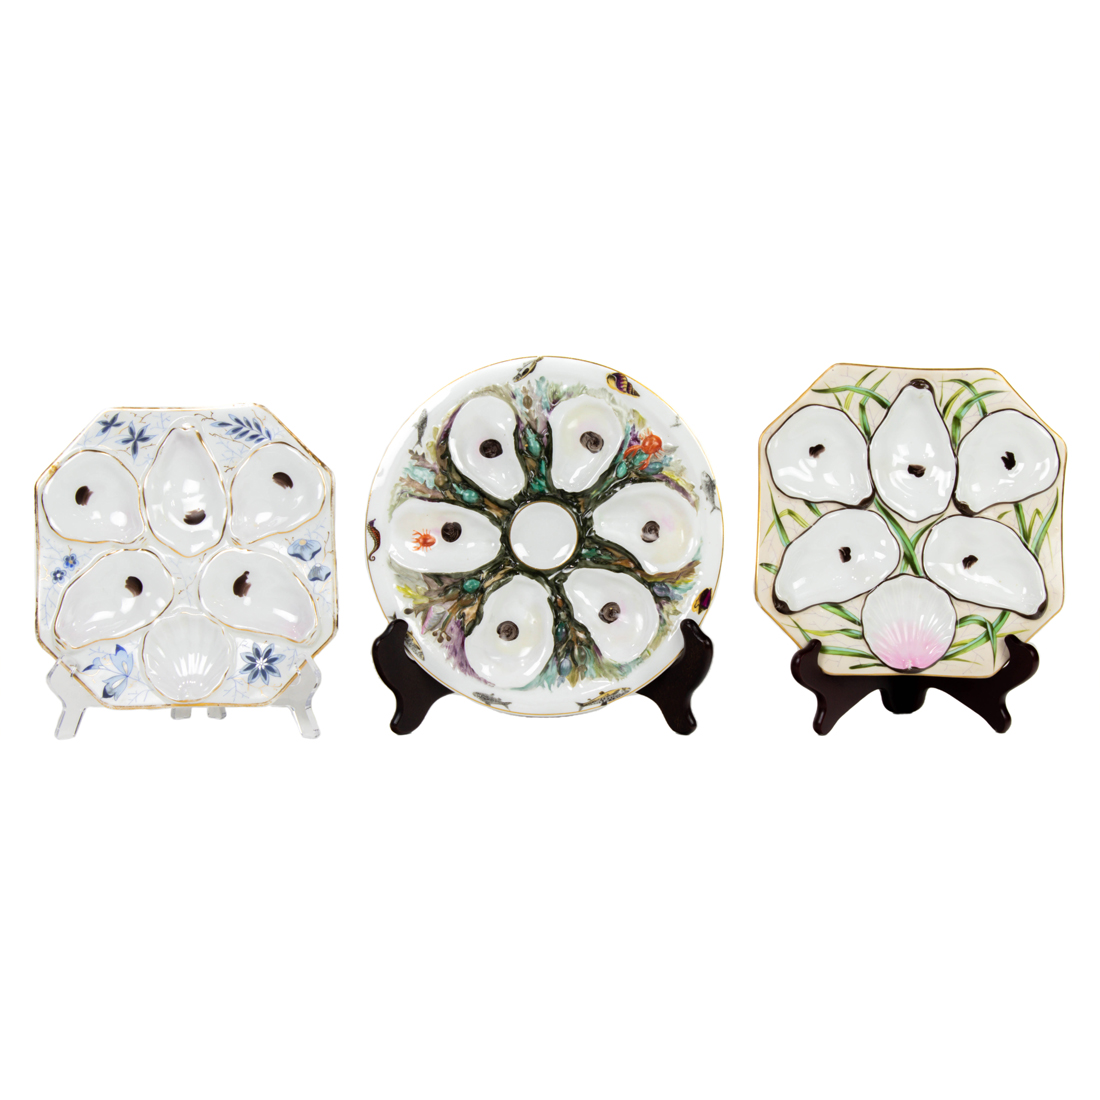 COLLECTION OF SIX PORCELAIN OYSTER 3a1d36